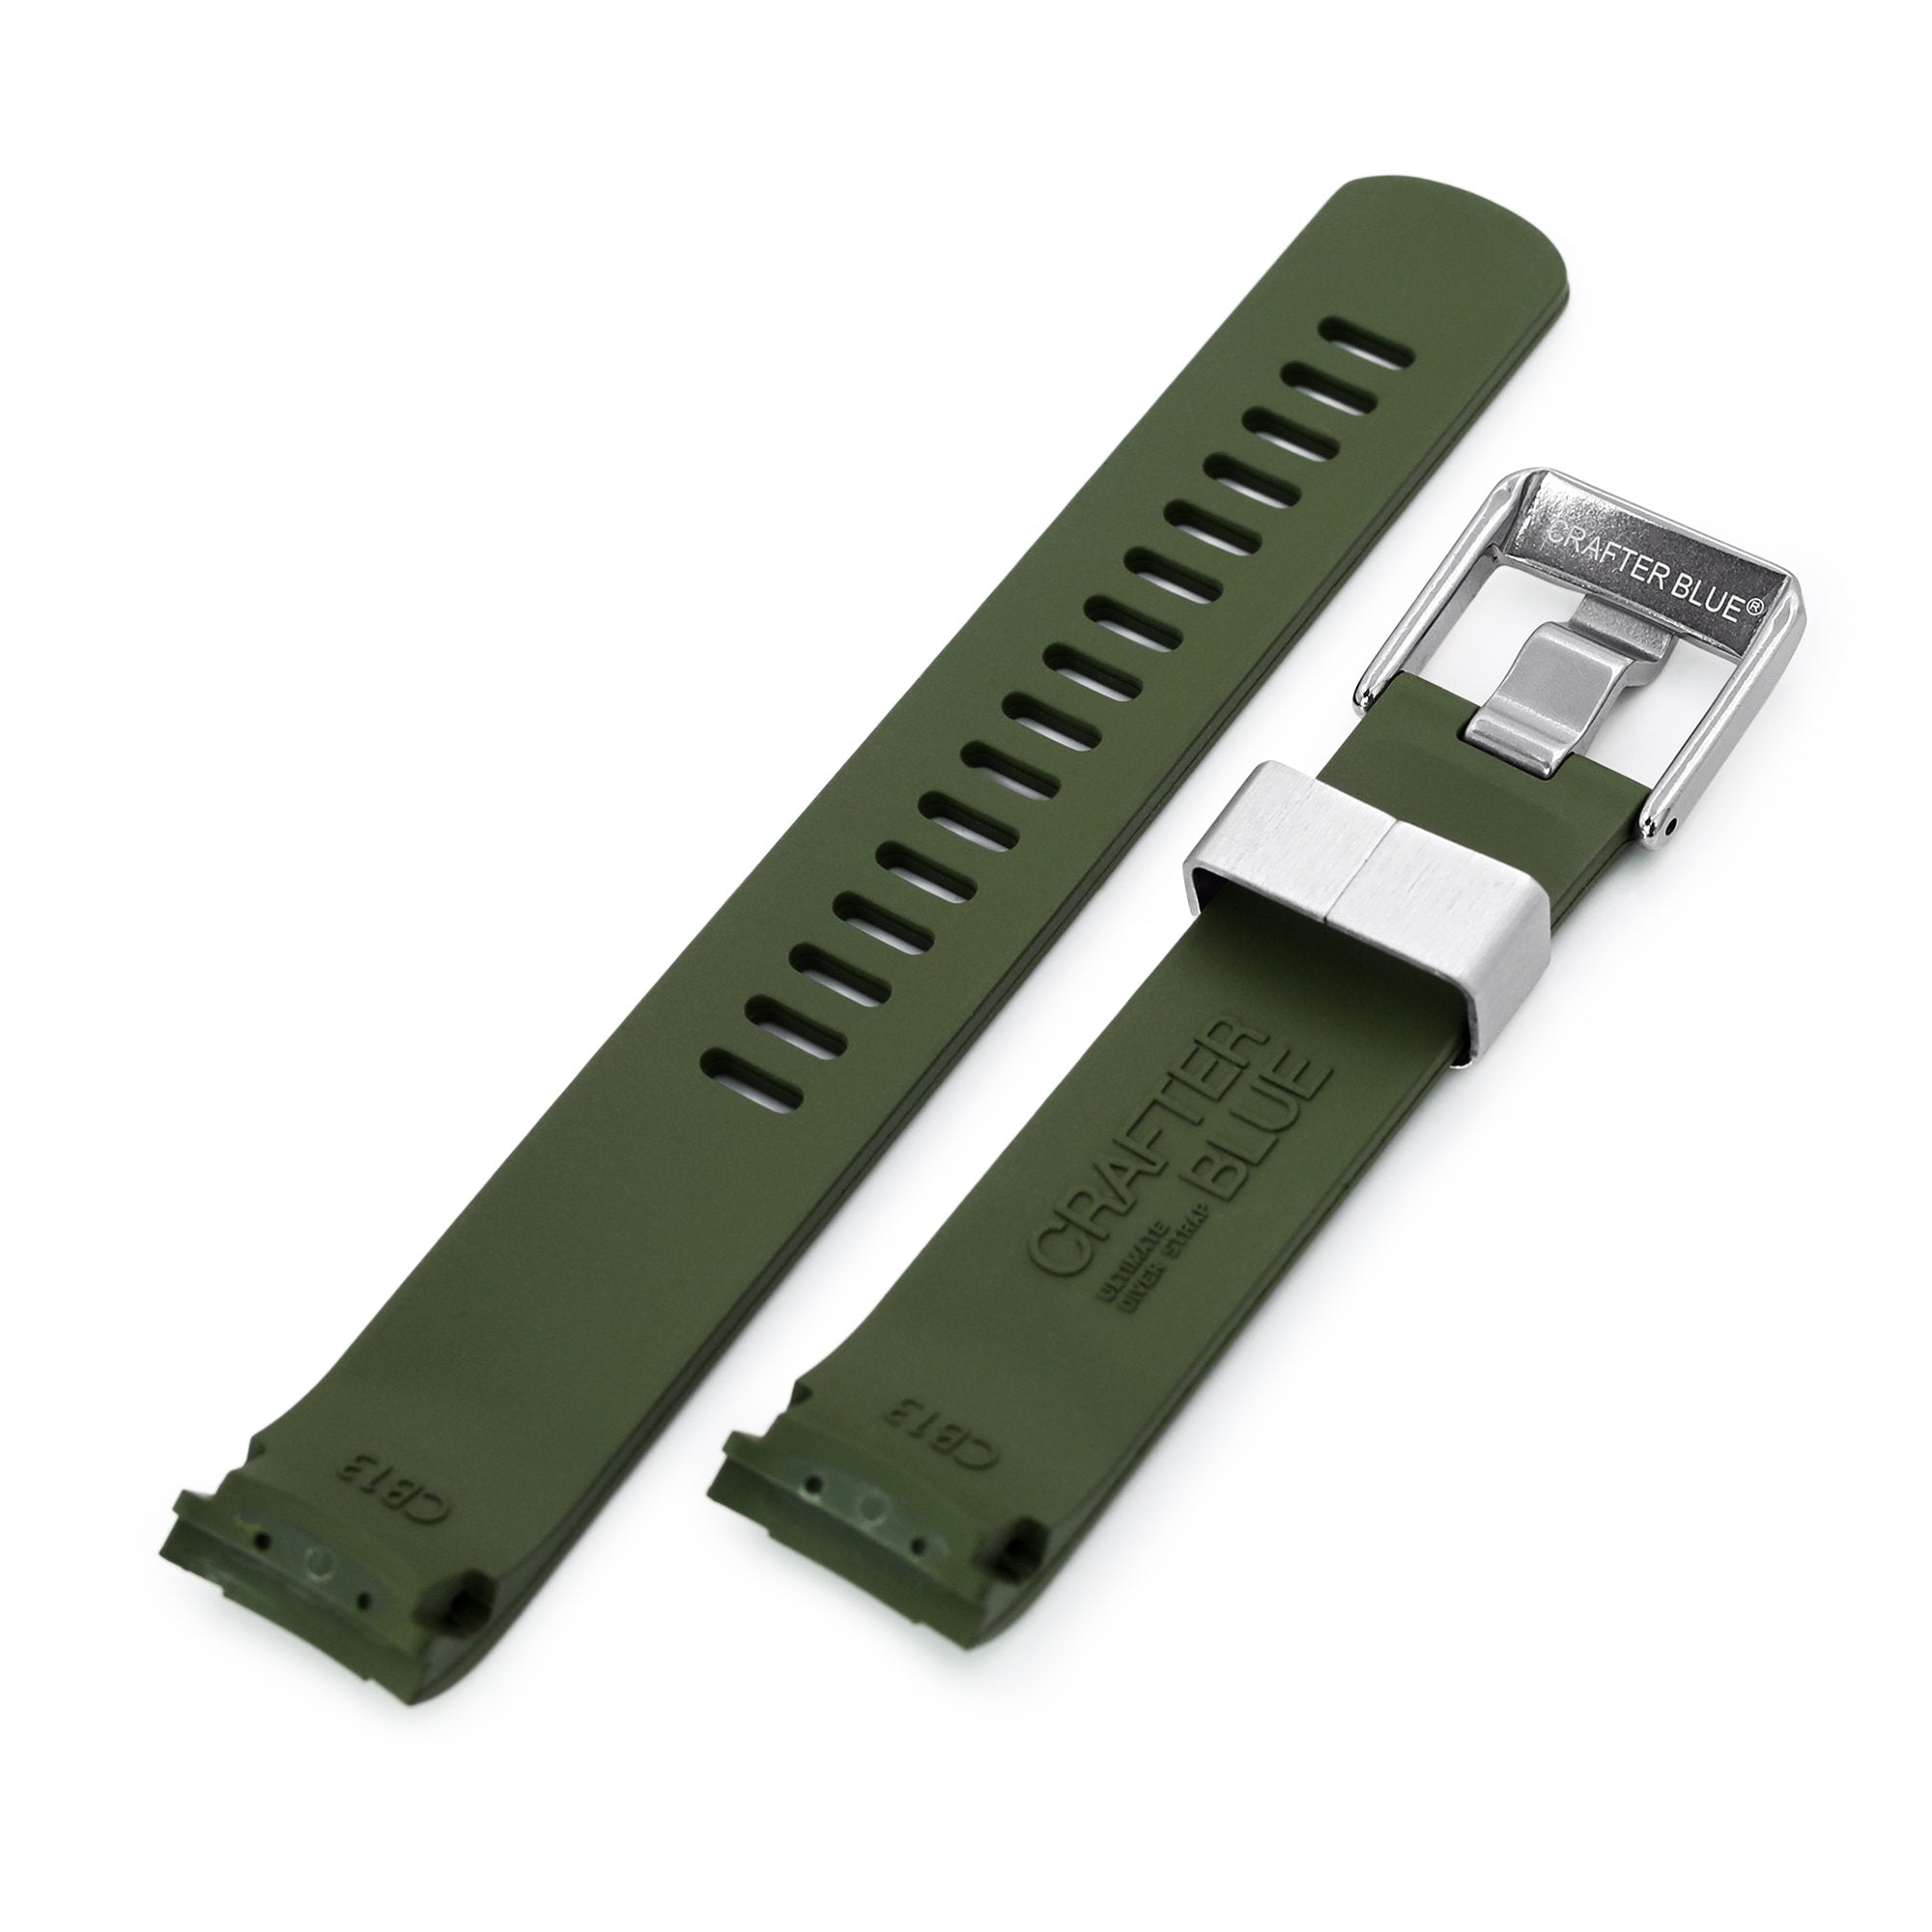 20mm Crafter Blue - Military Green Rubber Curved Lug Watch Strap for Seiko Baby MM200 & Mini Turtles SRPC35 Strapcode Watch Bands